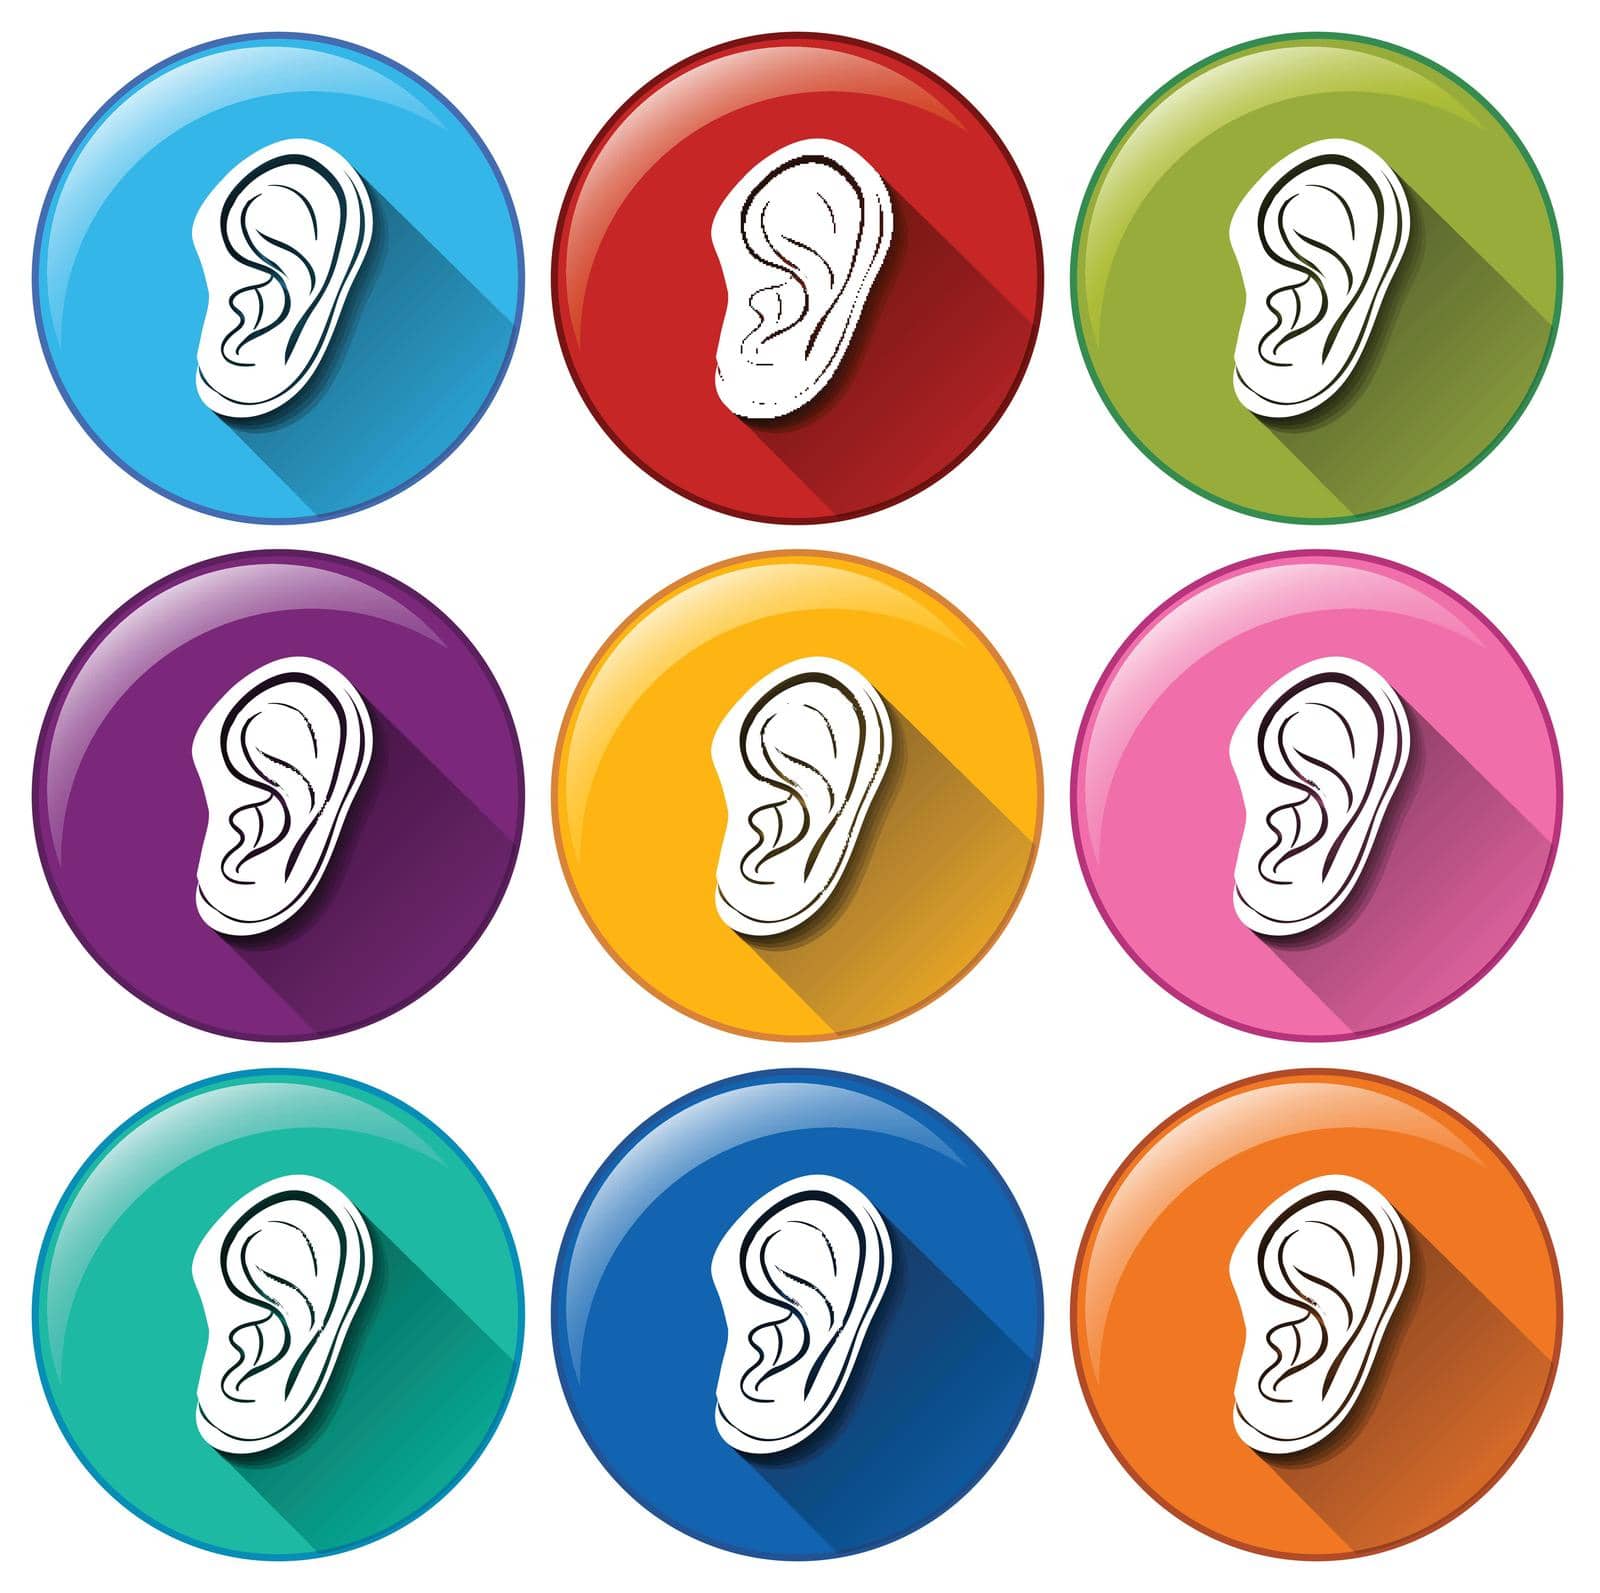 Illustration of different color icons with ear